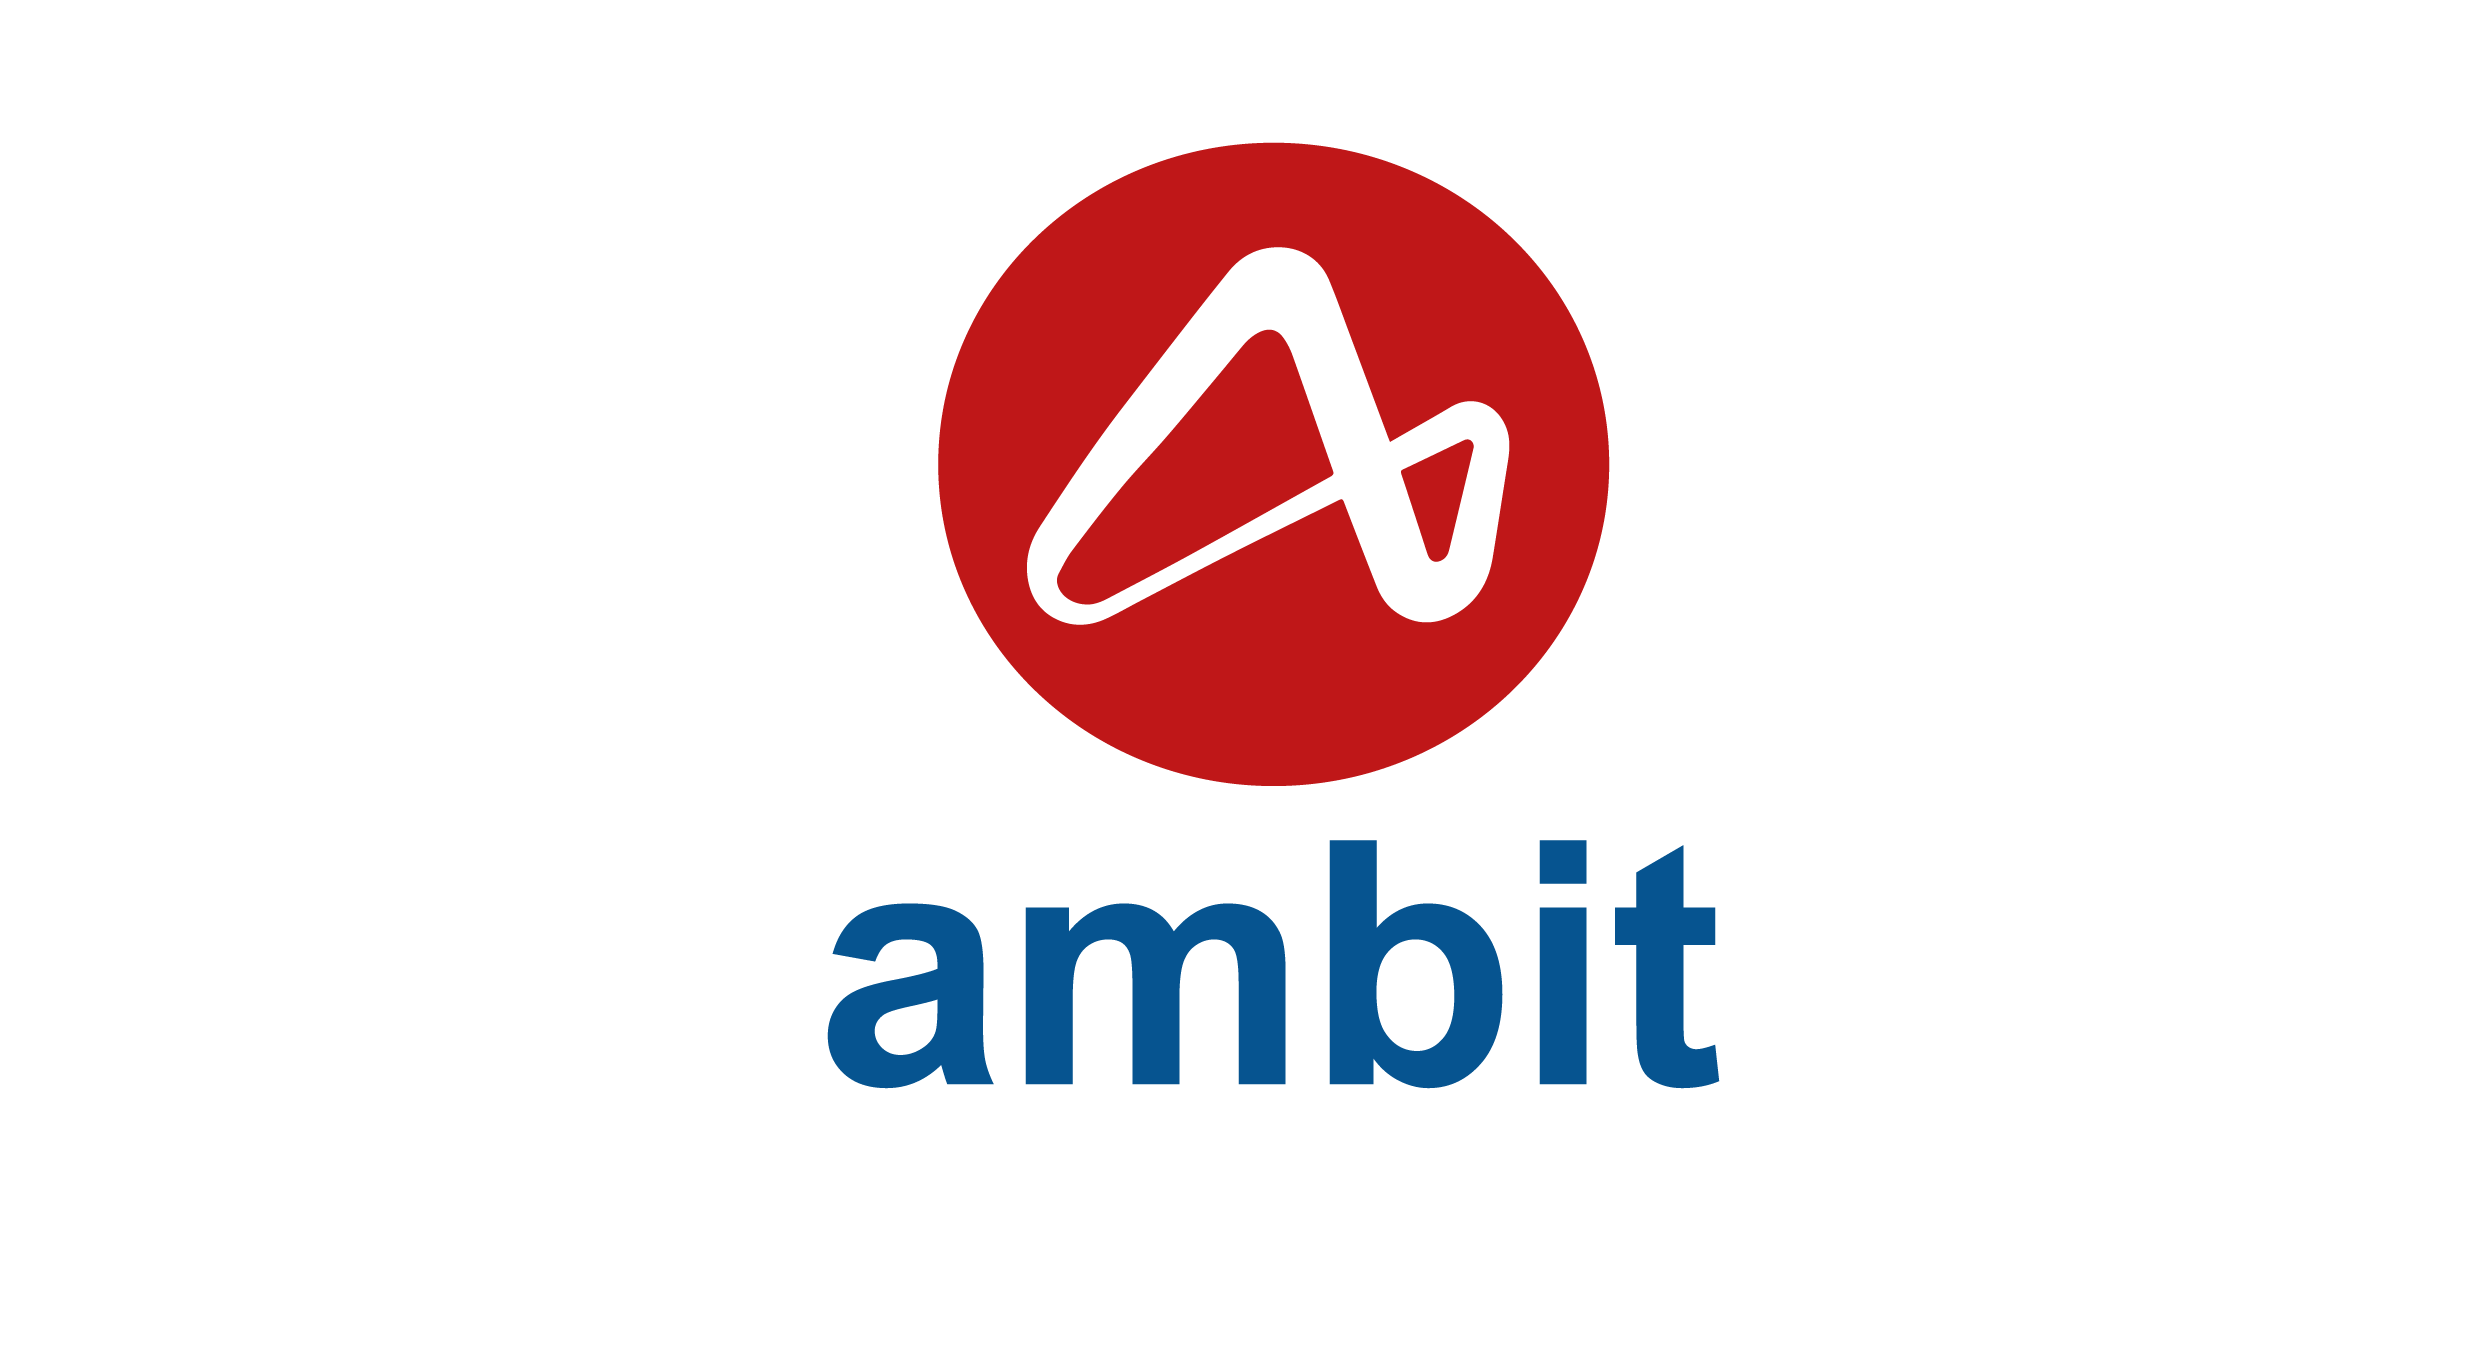 Ambit Software profile on Qualified.One